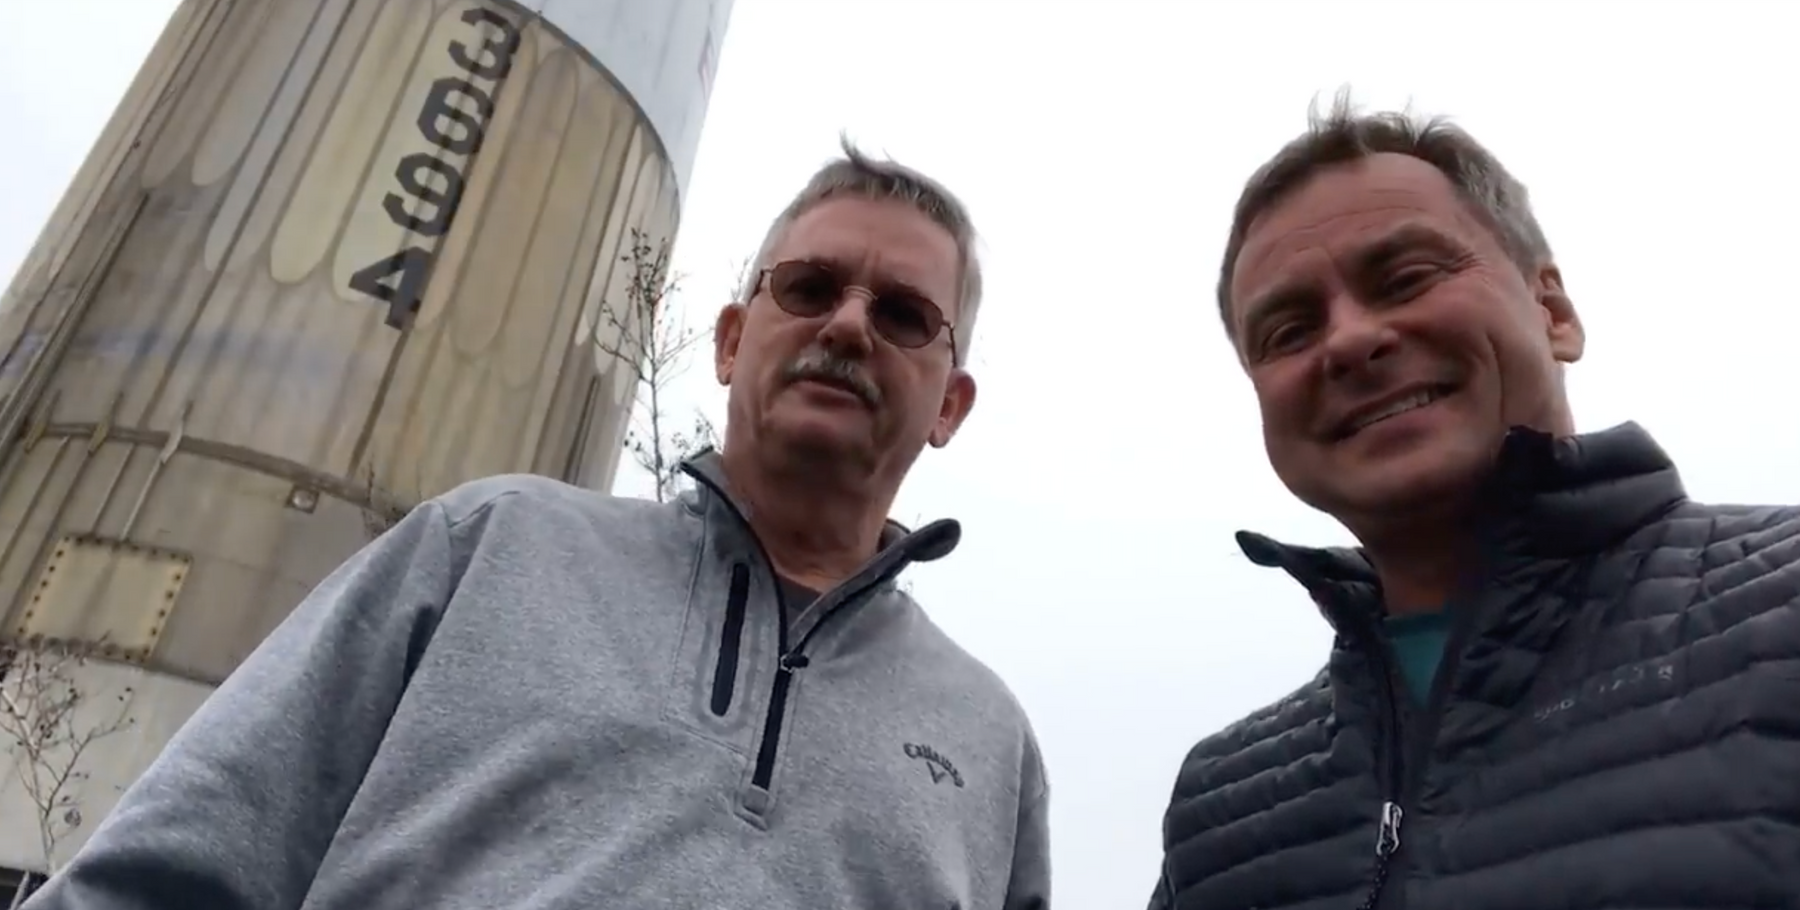 Winter Star Party 2018 - Scott and Greg on the way...